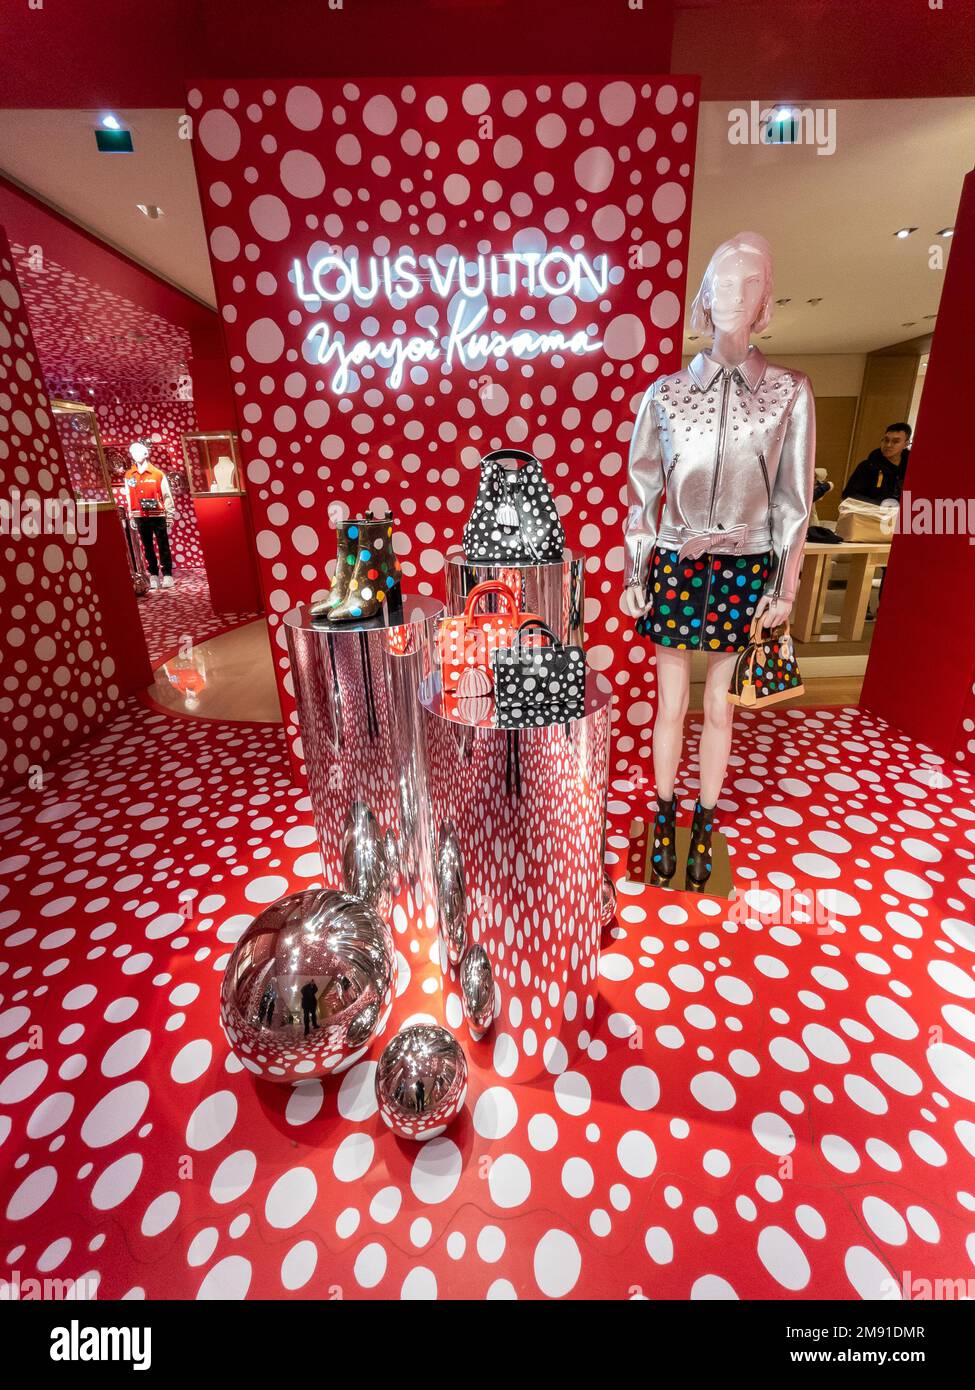 The facade of the Louis Vuitton Store displays a Yayoi Kusama